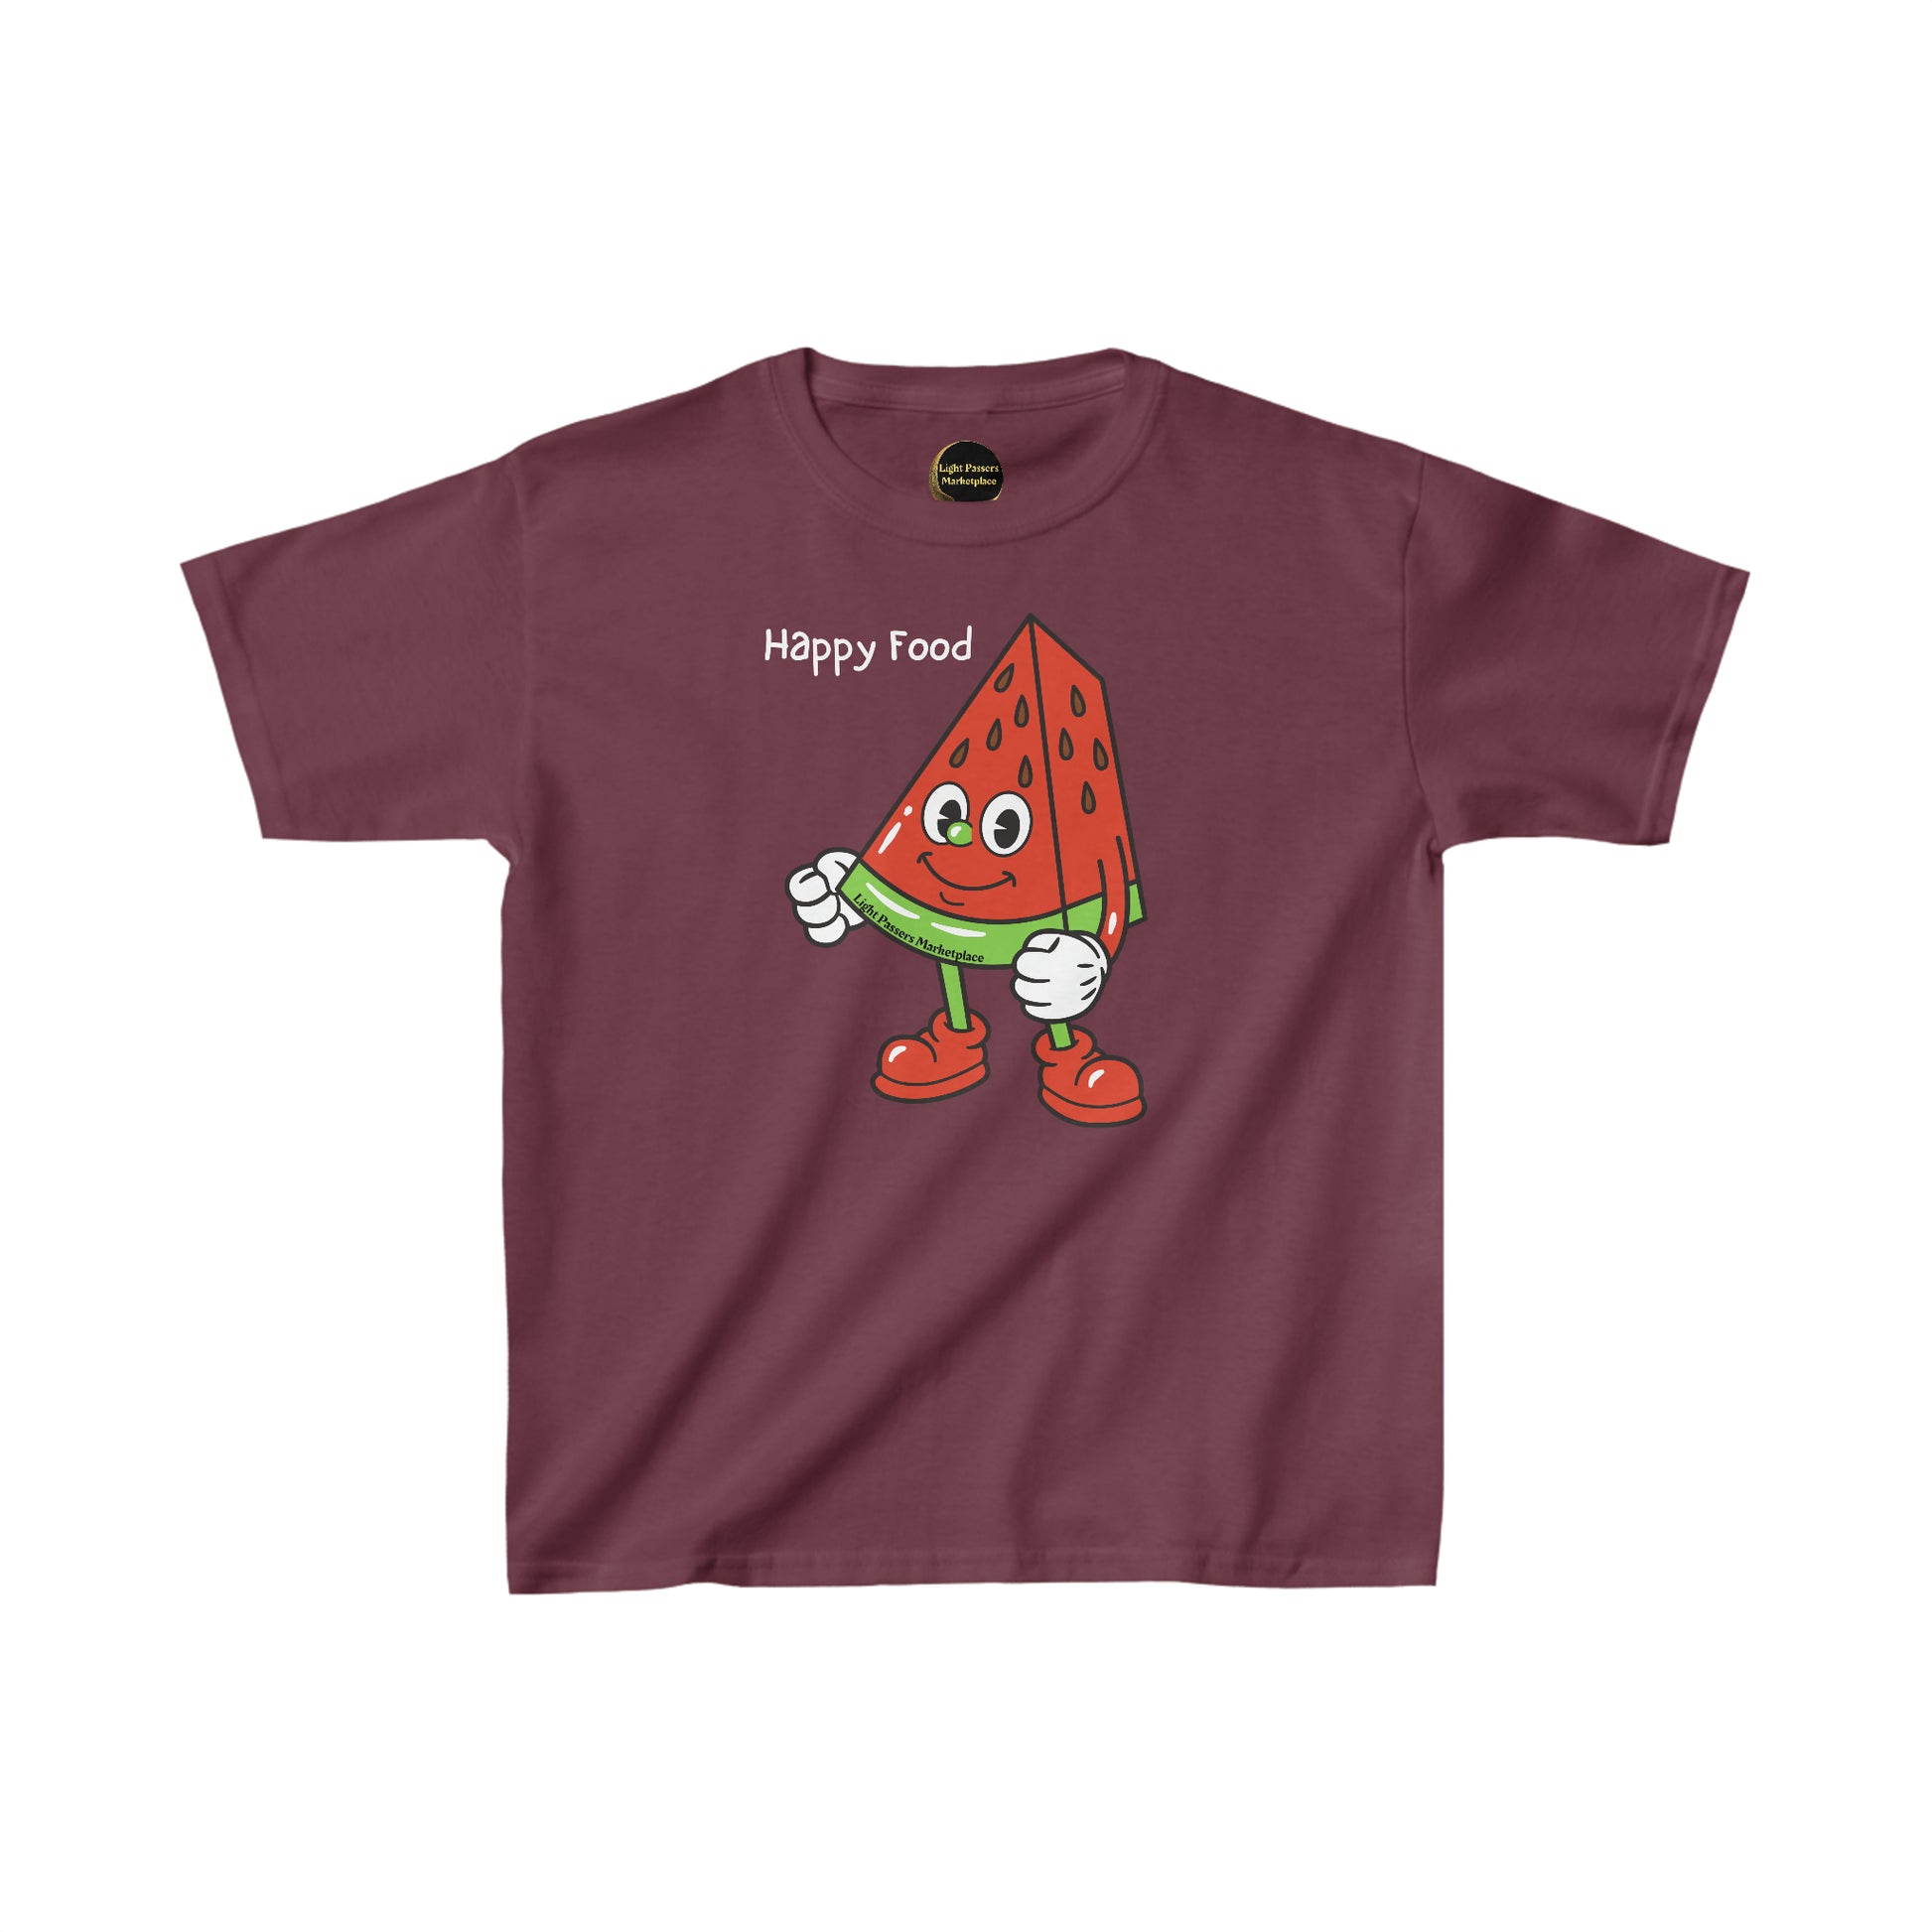 Youth t-shirt featuring a cartoon watermelon design. Made of 100% cotton with twill tape shoulders for durability. Classic fit with tear-away labels for comfort. Ethically sourced US cotton.